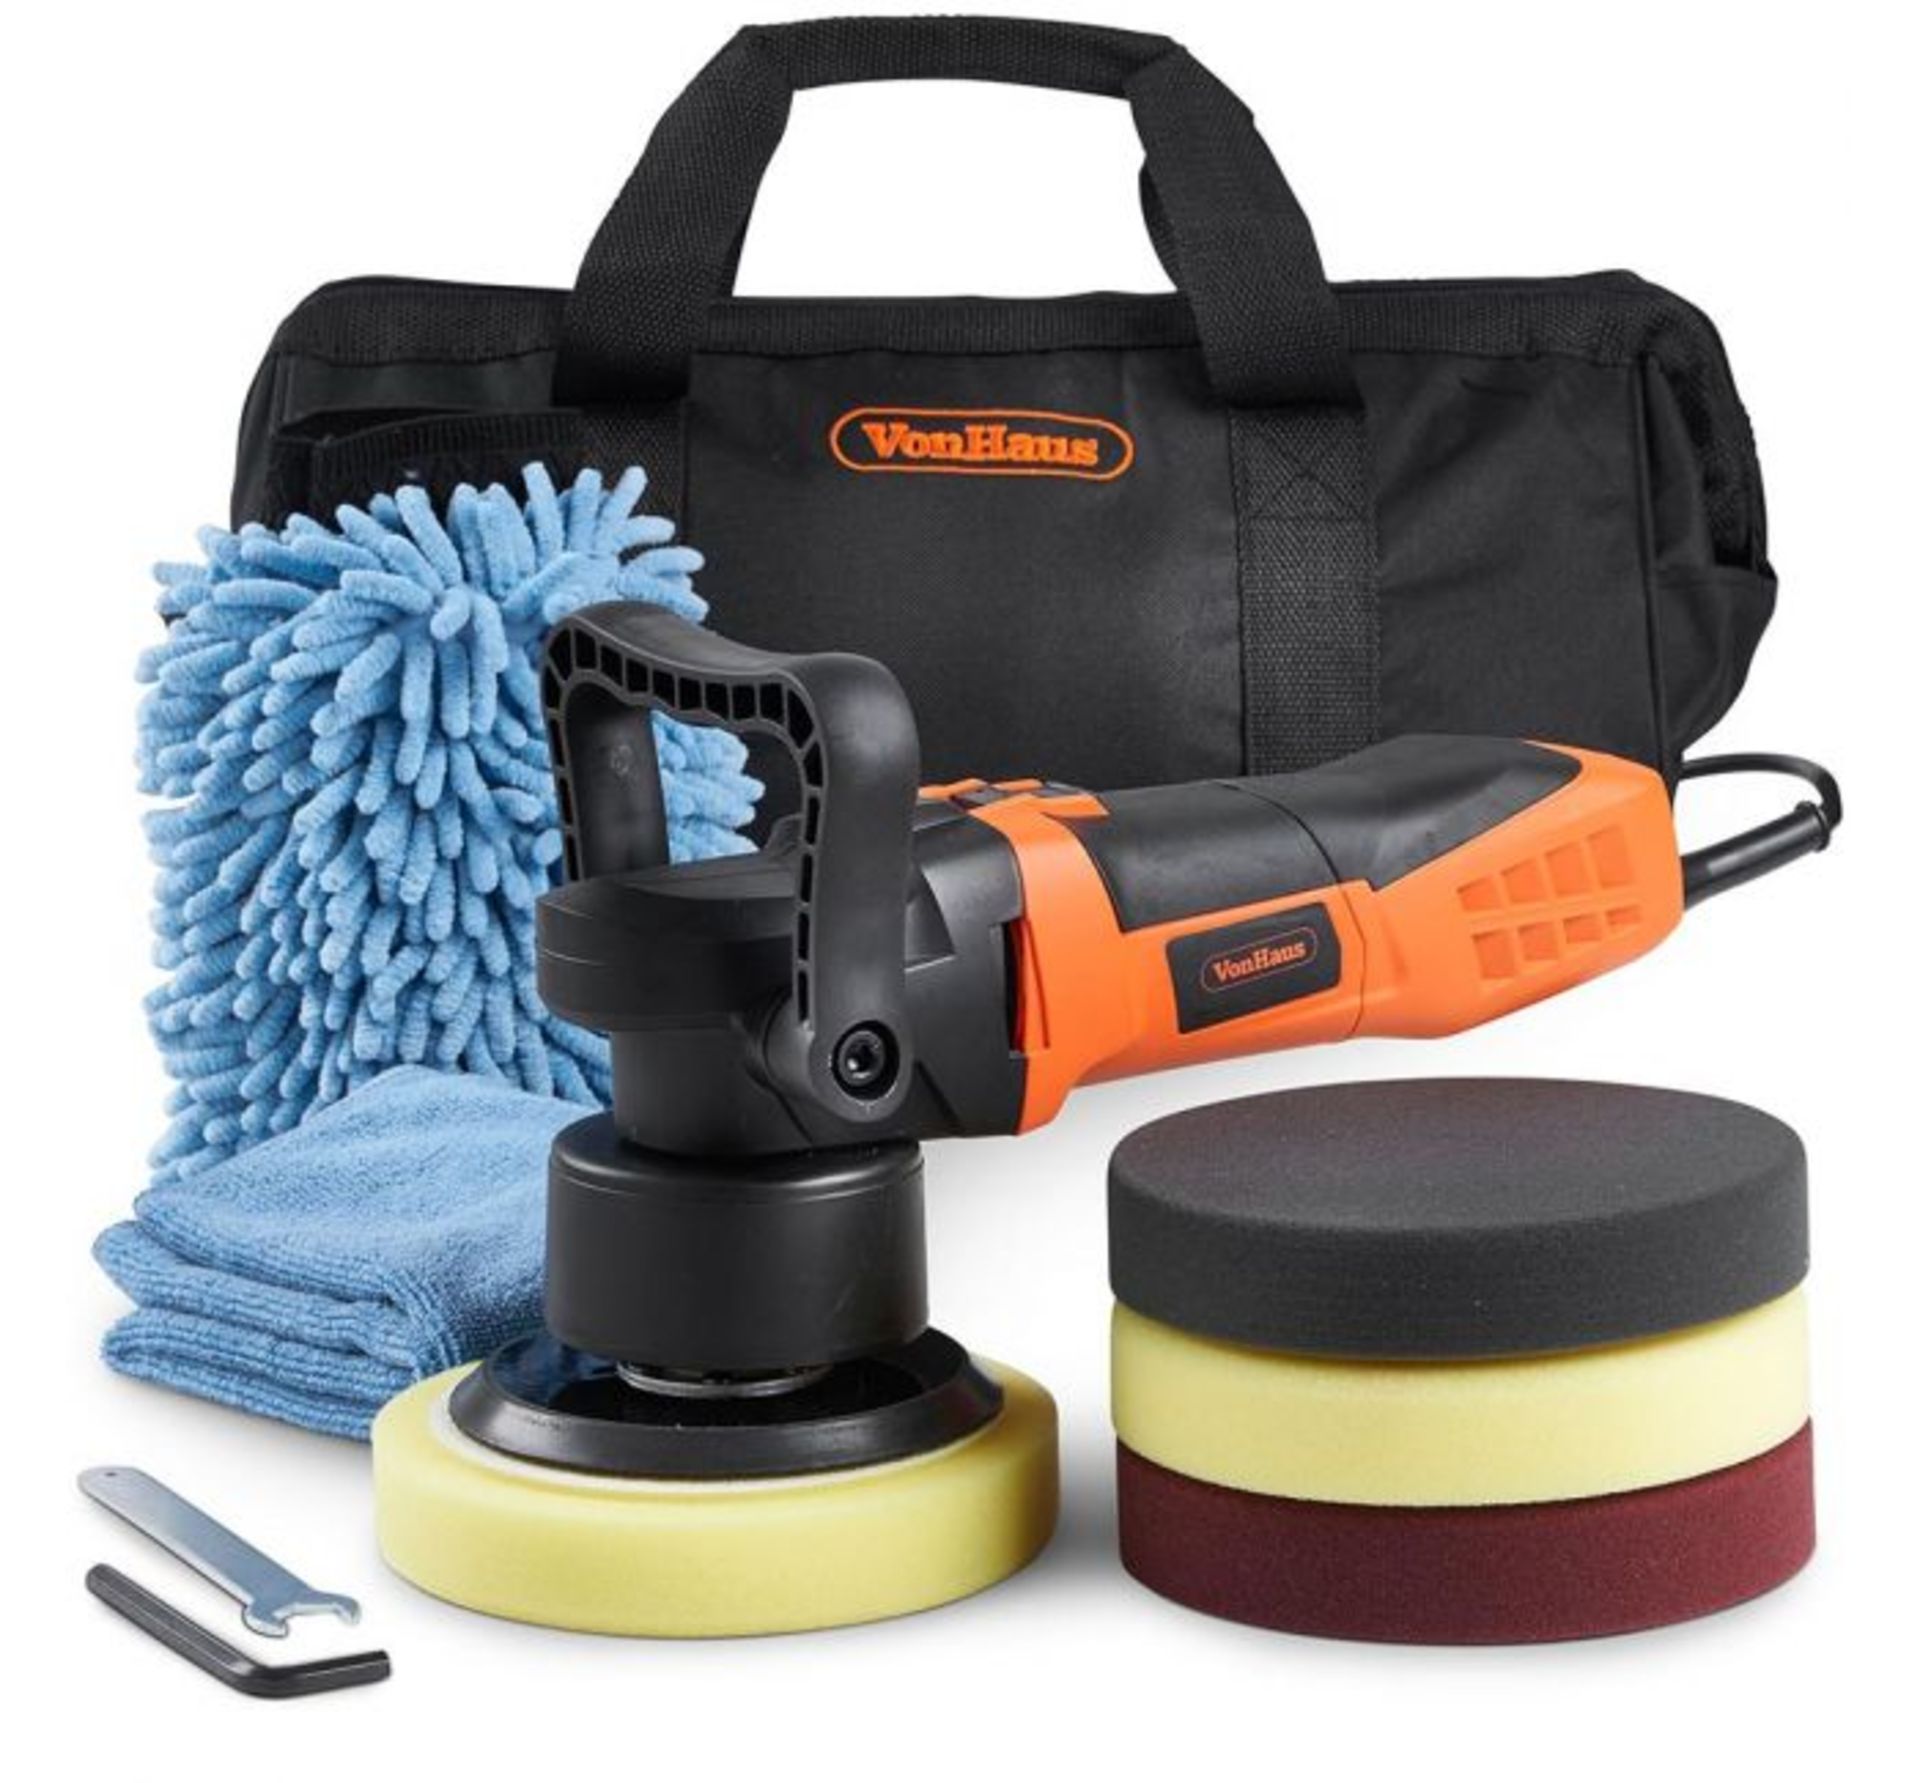 (JH20) Random Orbital Polisher Kit 600W power, the polisher operates at six speed settings fro... - Image 3 of 3